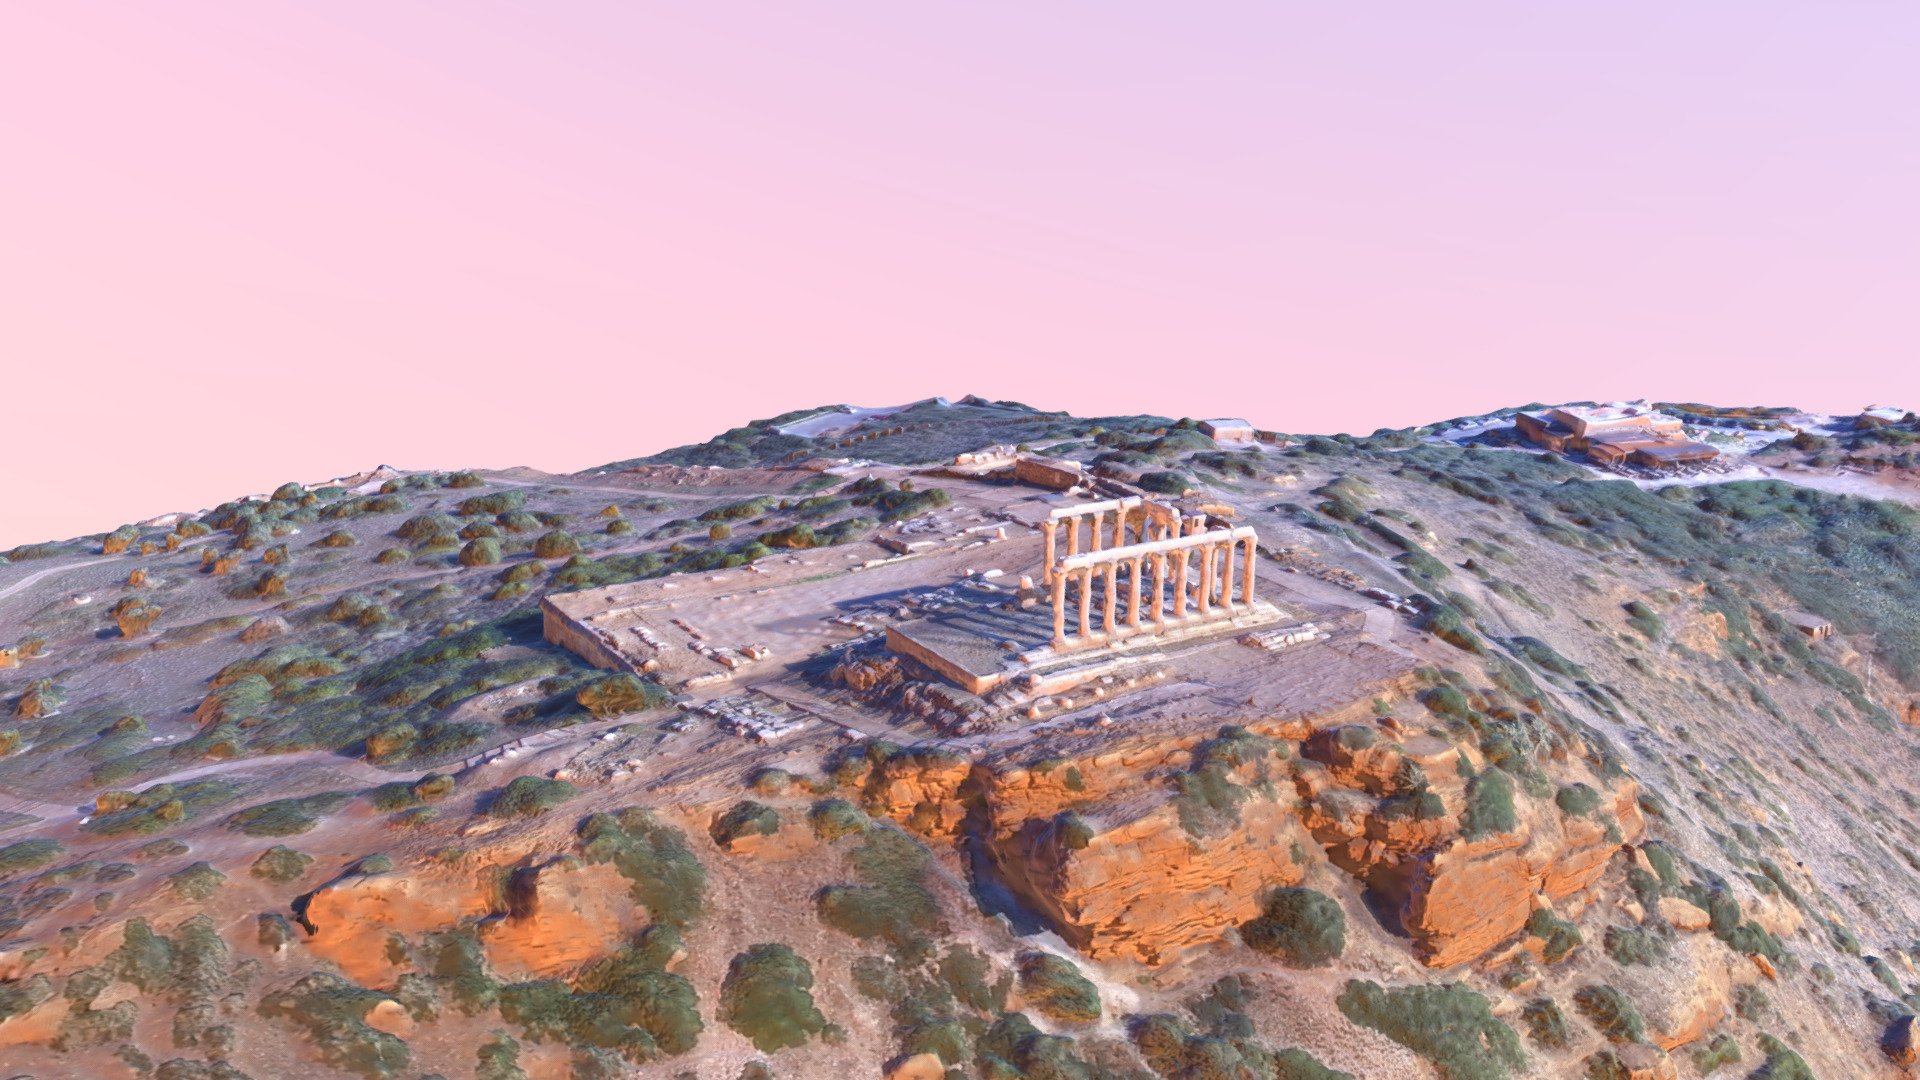 The ancient Greek temple of Poseidon at Cape Sounion, built during 444–440 BC, is one of the major monuments of the Golden Age of Athens. A Doric temple, it overlooks the sea at the end of Cape Sounion, at an elevation of almost 60 metres (200 ft).

Model made by photogrammetry with 251 photos 3d model